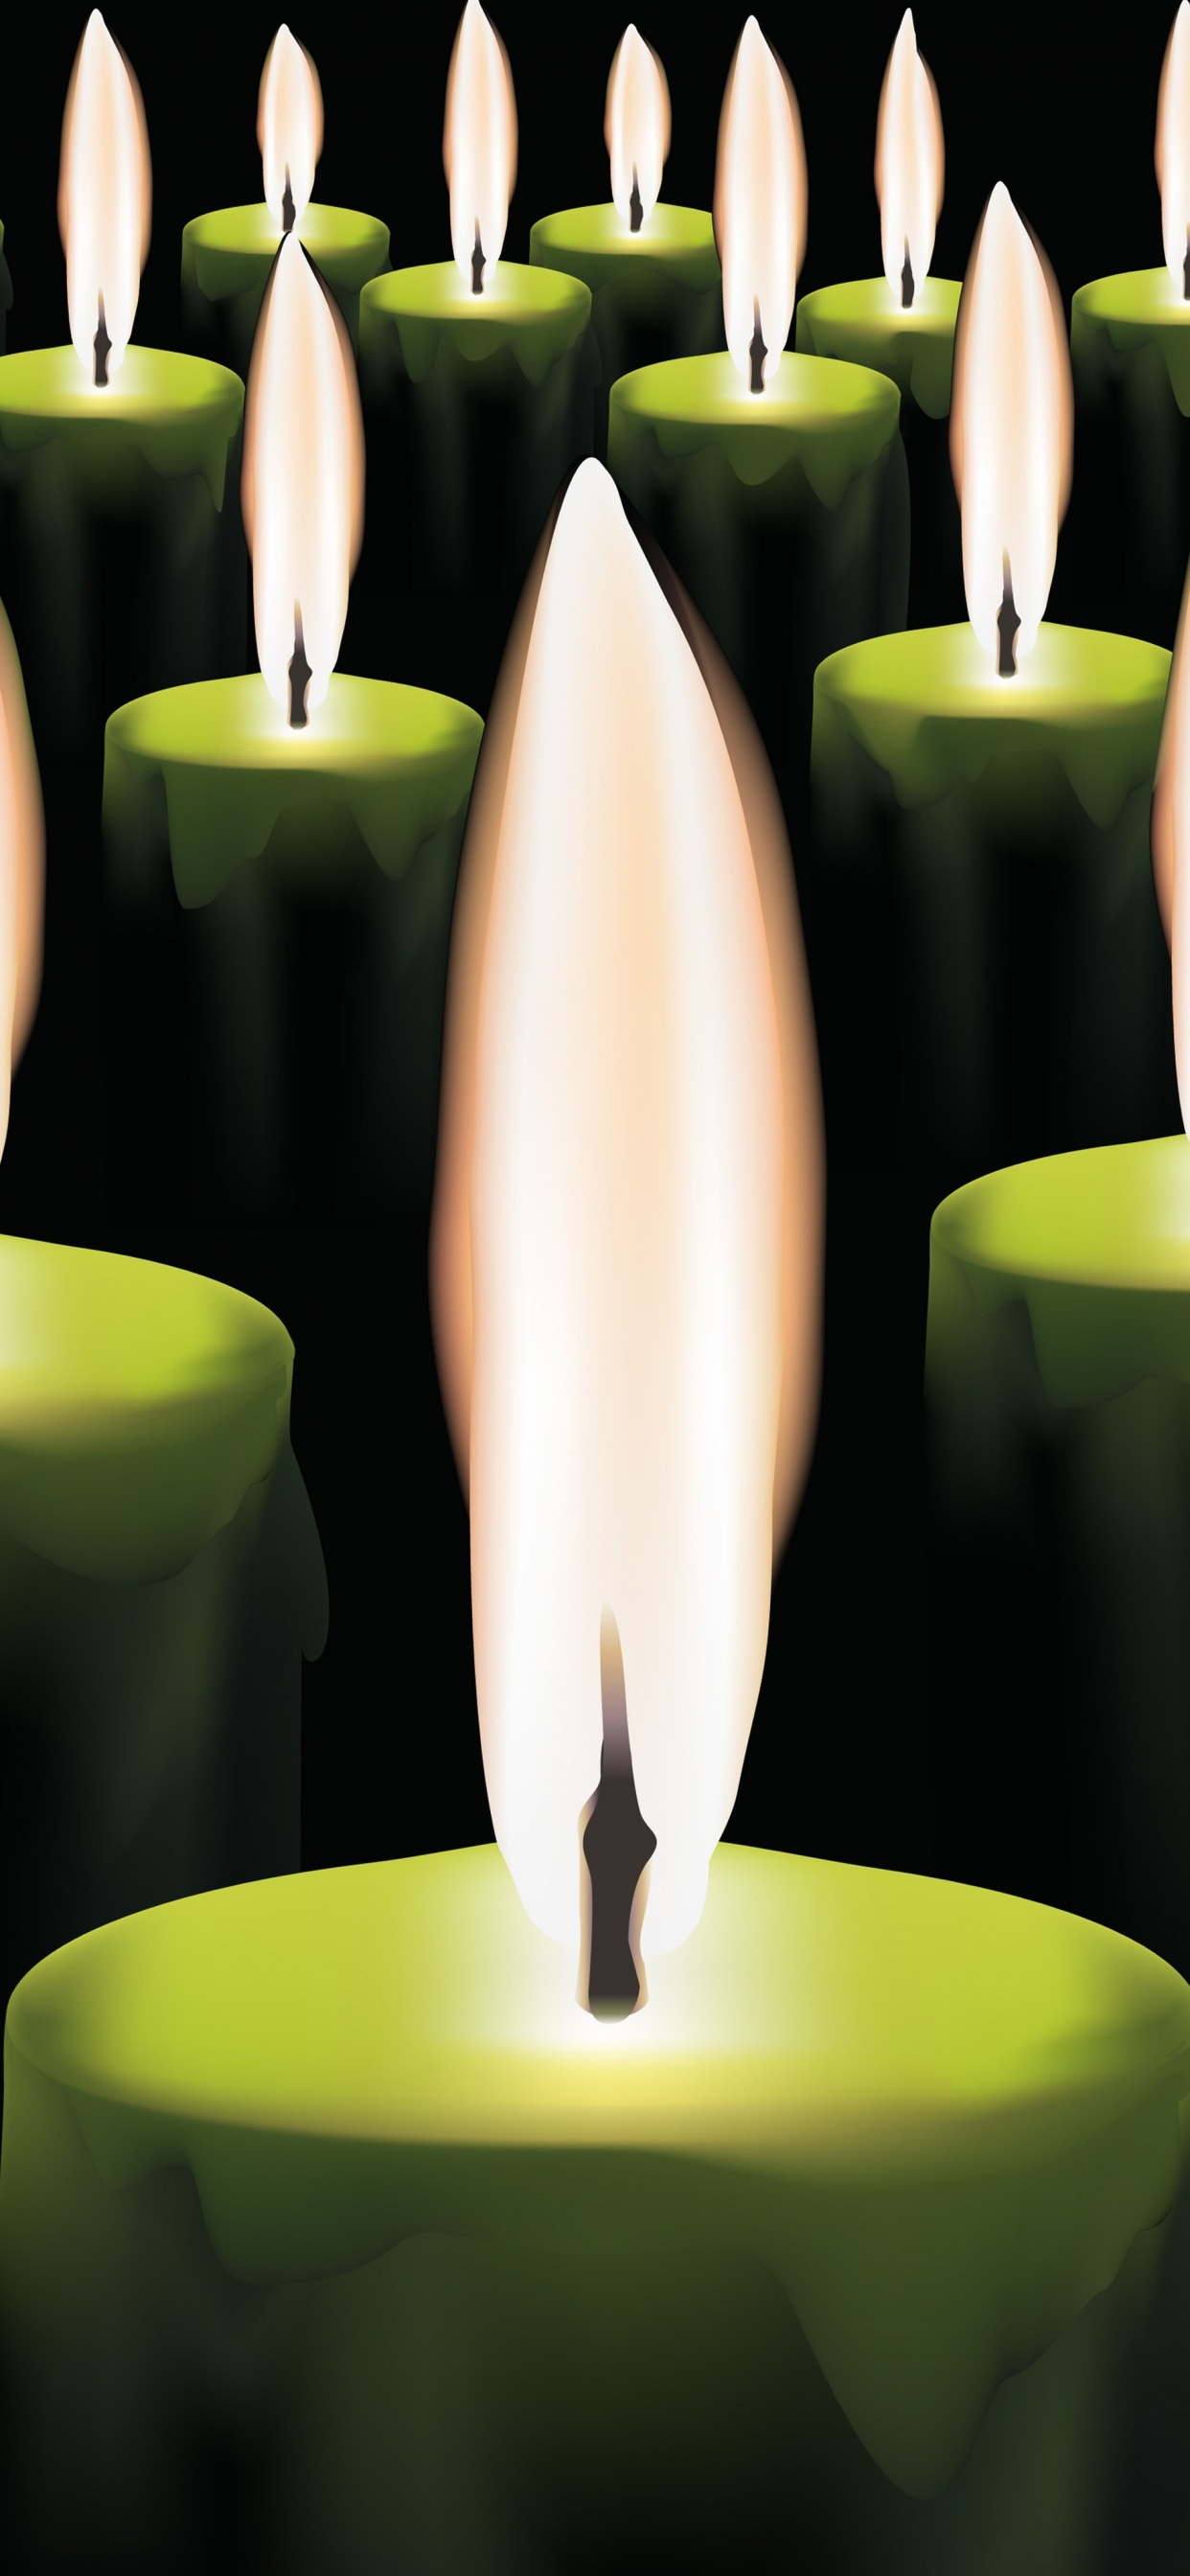 Burning Candles, Candle, Flame, Light, Lighting. Wallpaper in 1242x2688 Resolution